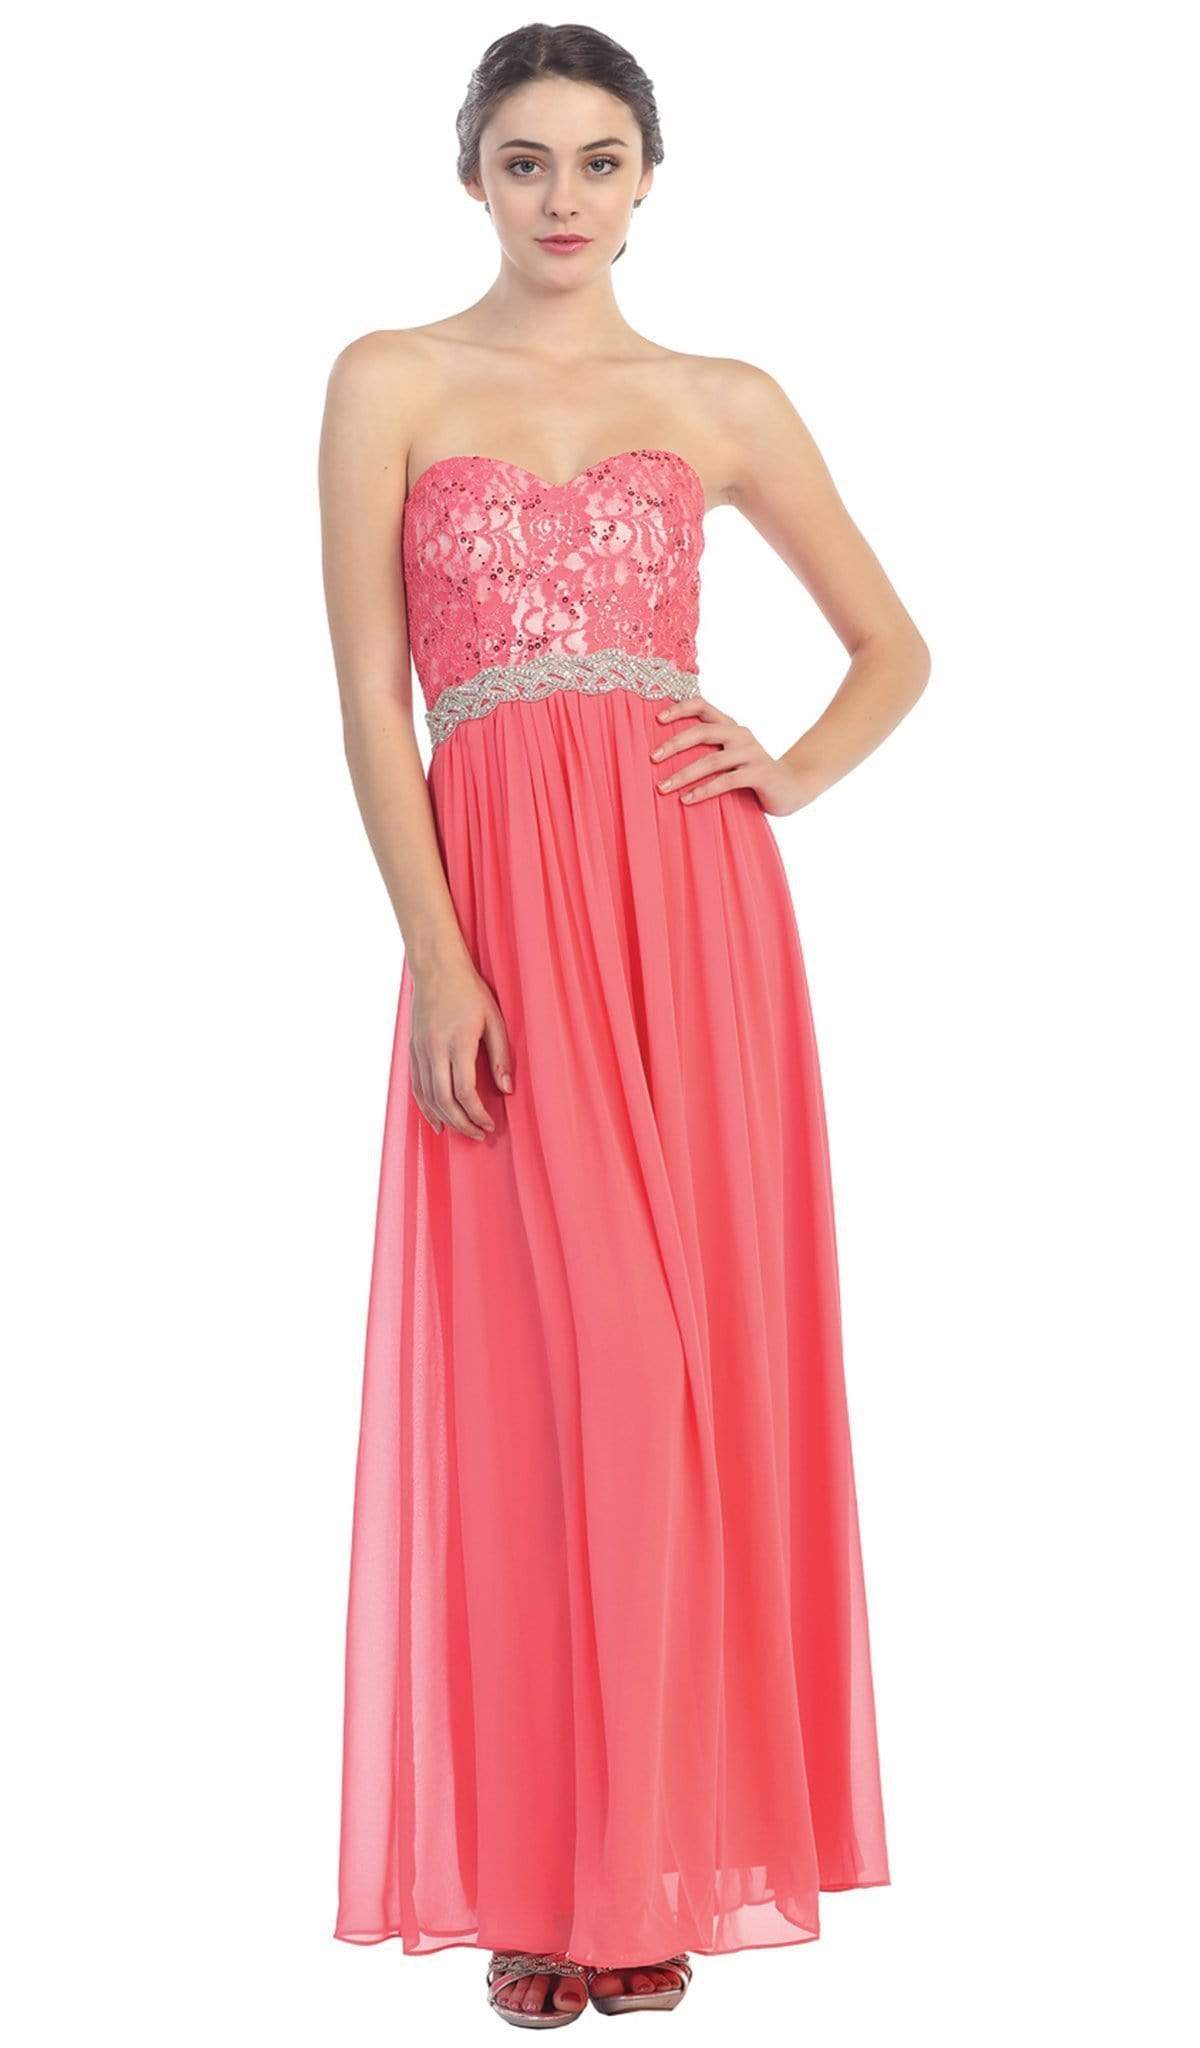 Image of Eureka Fashion - Strapless Sequined Lace Bodice A-Line Gown